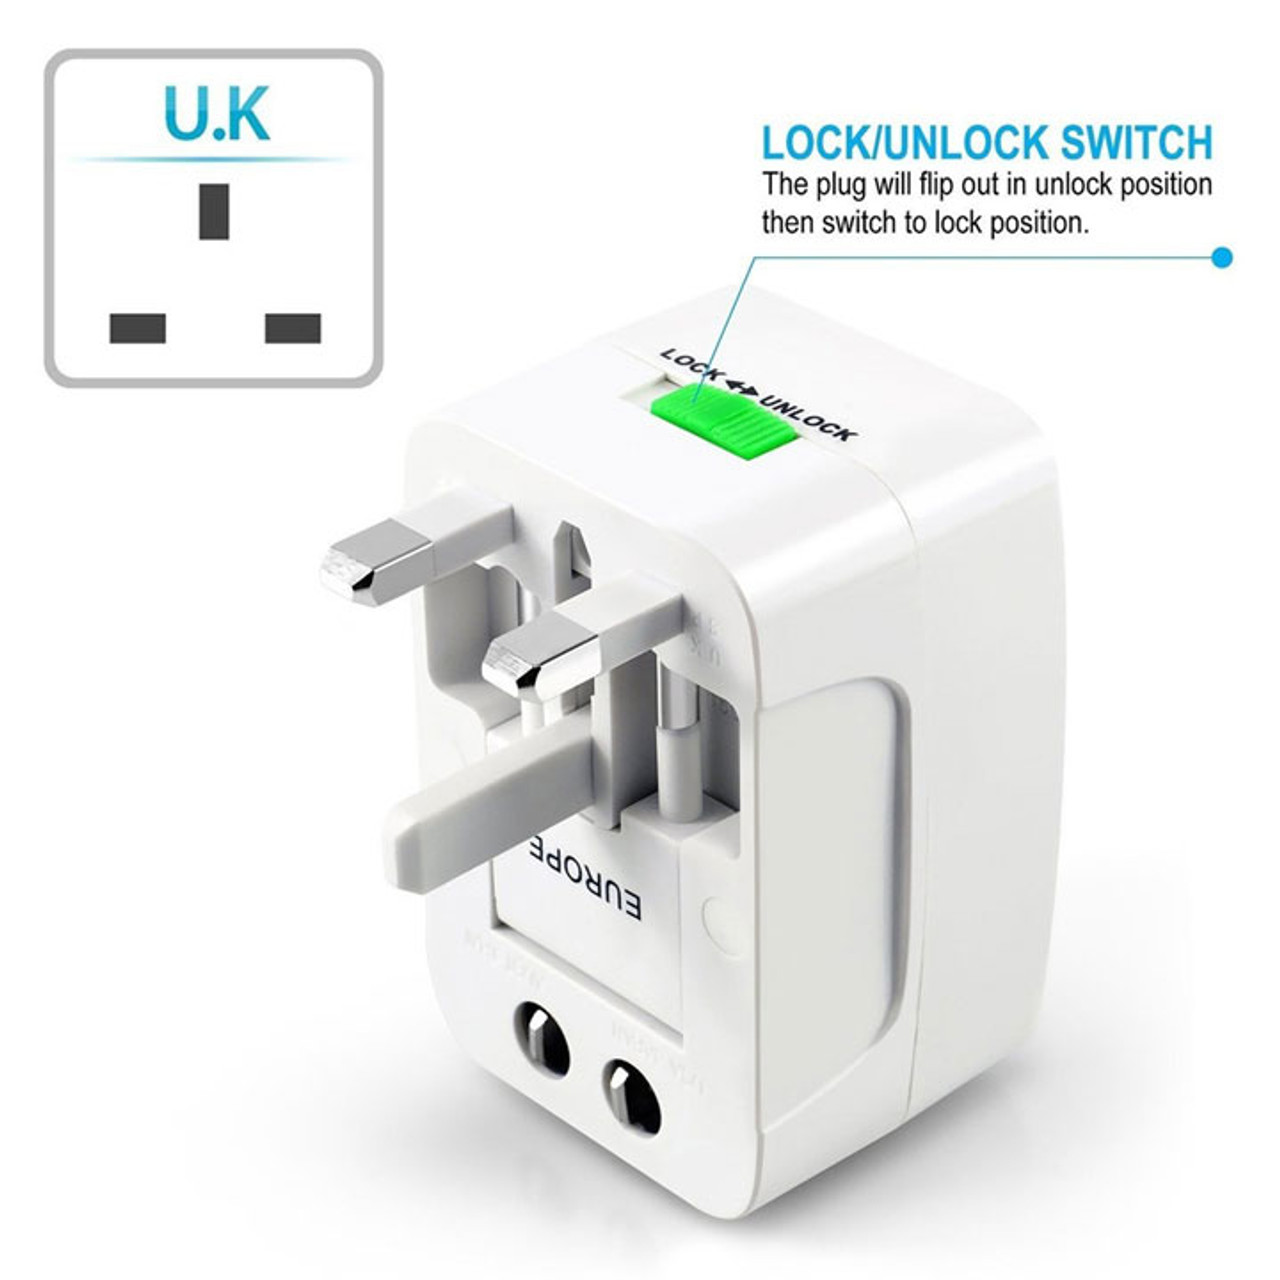 https://cdn11.bigcommerce.com/s-idr2t/images/stencil/1280x1280/products/185/1090/Travel-Plug-Adapter-UK__57002.1526564034.jpg?c=2?imbypass=on